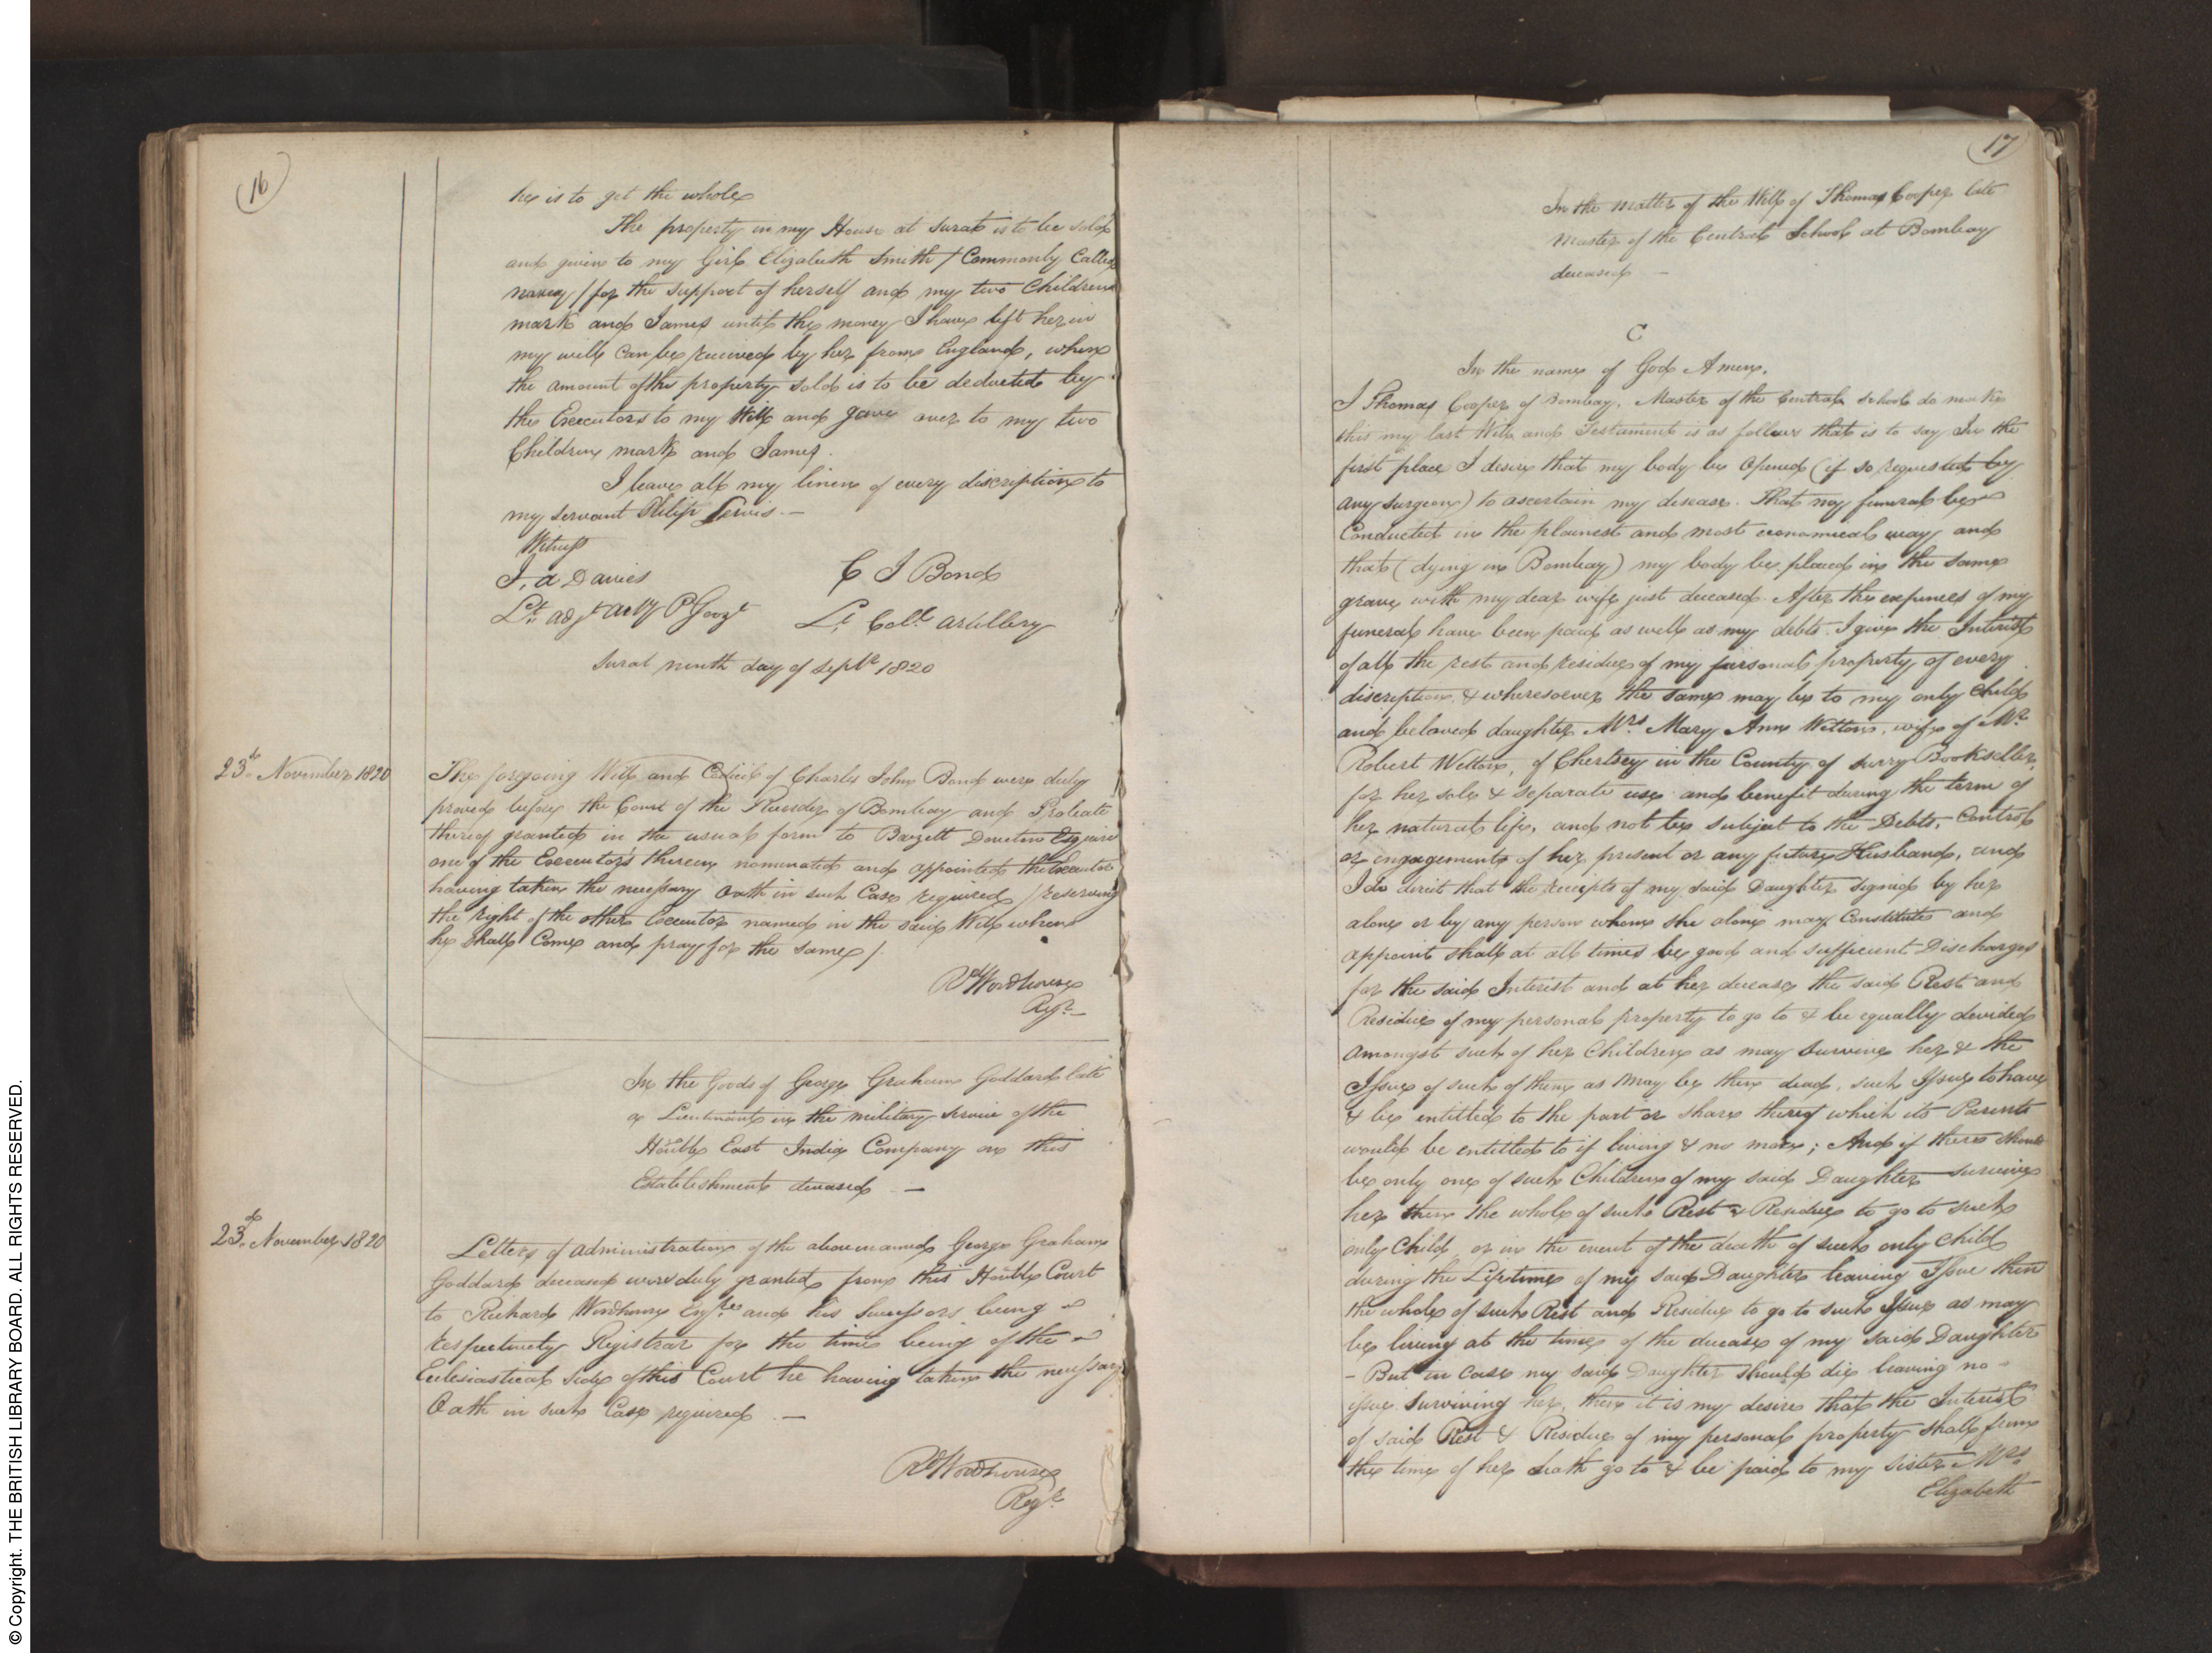 Probate and will for Charles John Bond, Mark Bond’s father, 1820